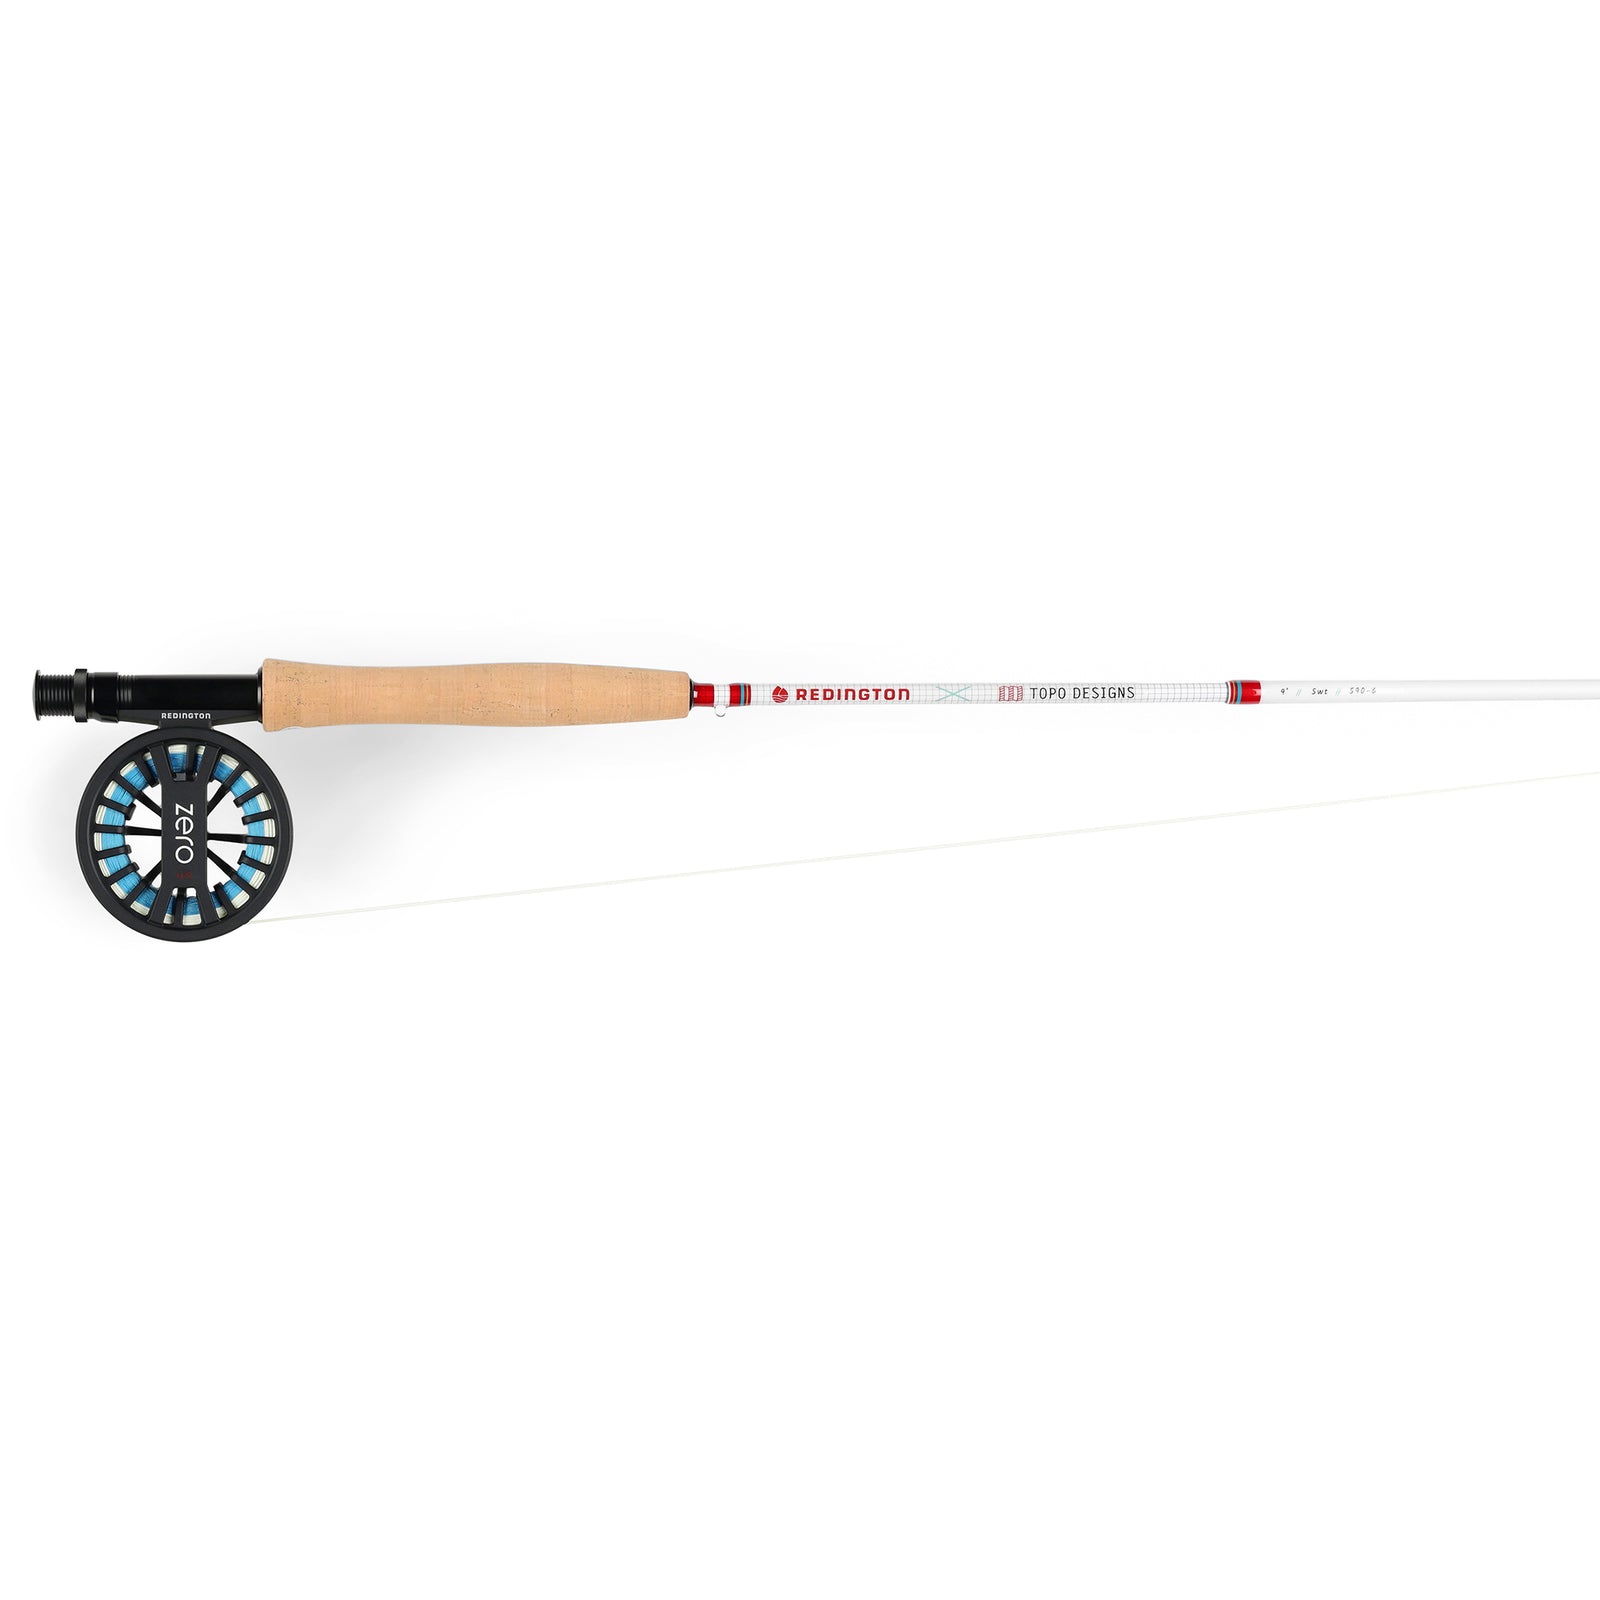 Topo Designs x Redington Fly Fishing Kit in "White / Turquoise" showing rod and reel.